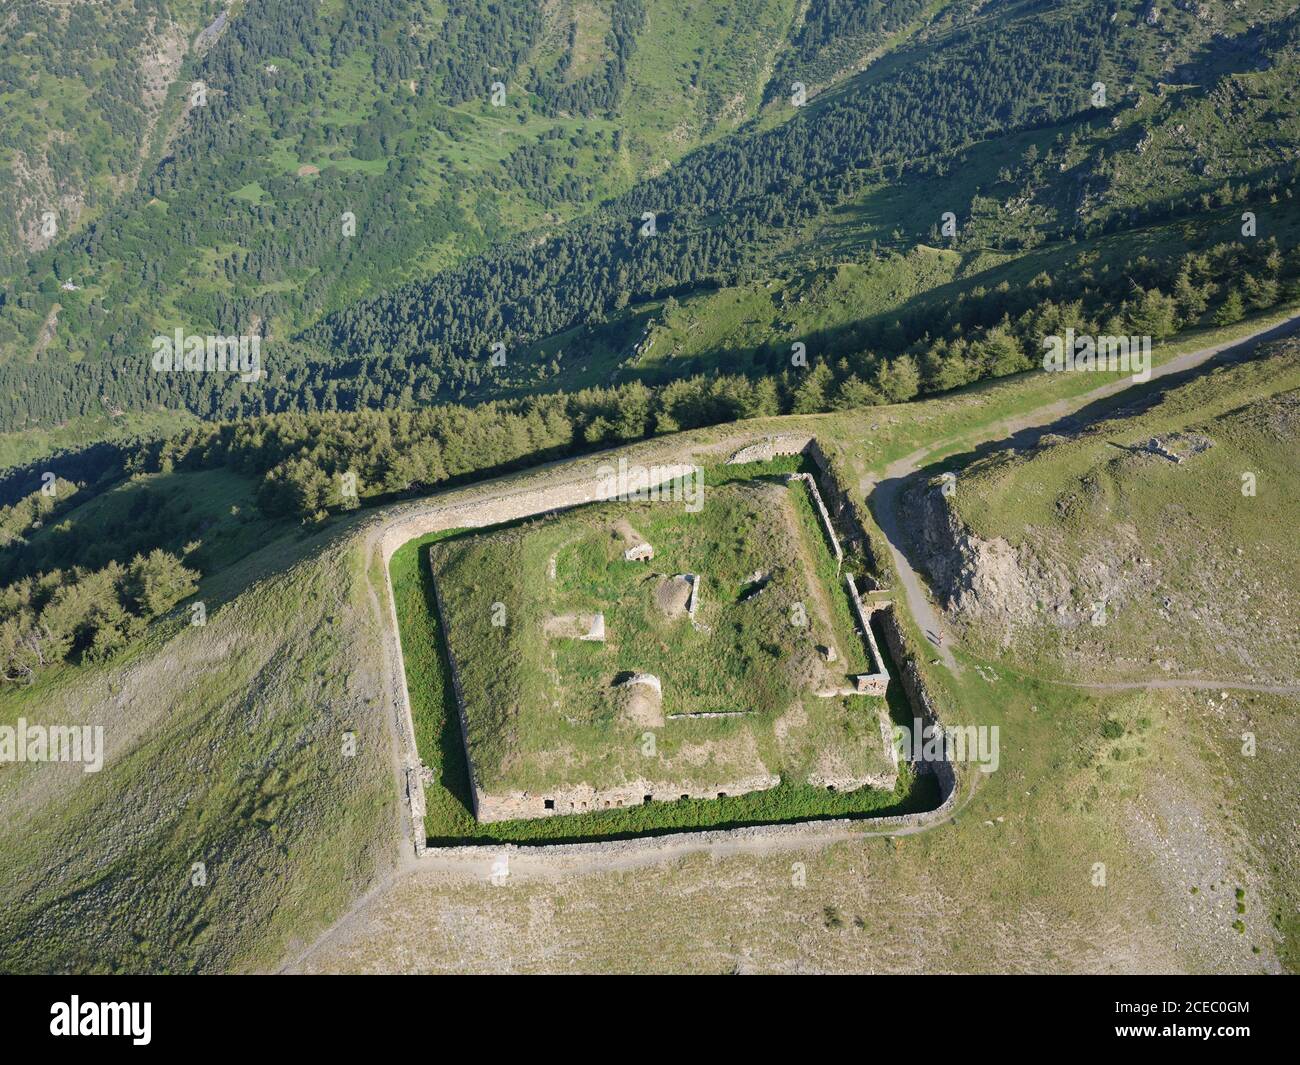 AERIAL VIEW. Fort Tabourde, an old military fortification near Col de Tende. Tende, Alpes-Maritimes, France. Stock Photo